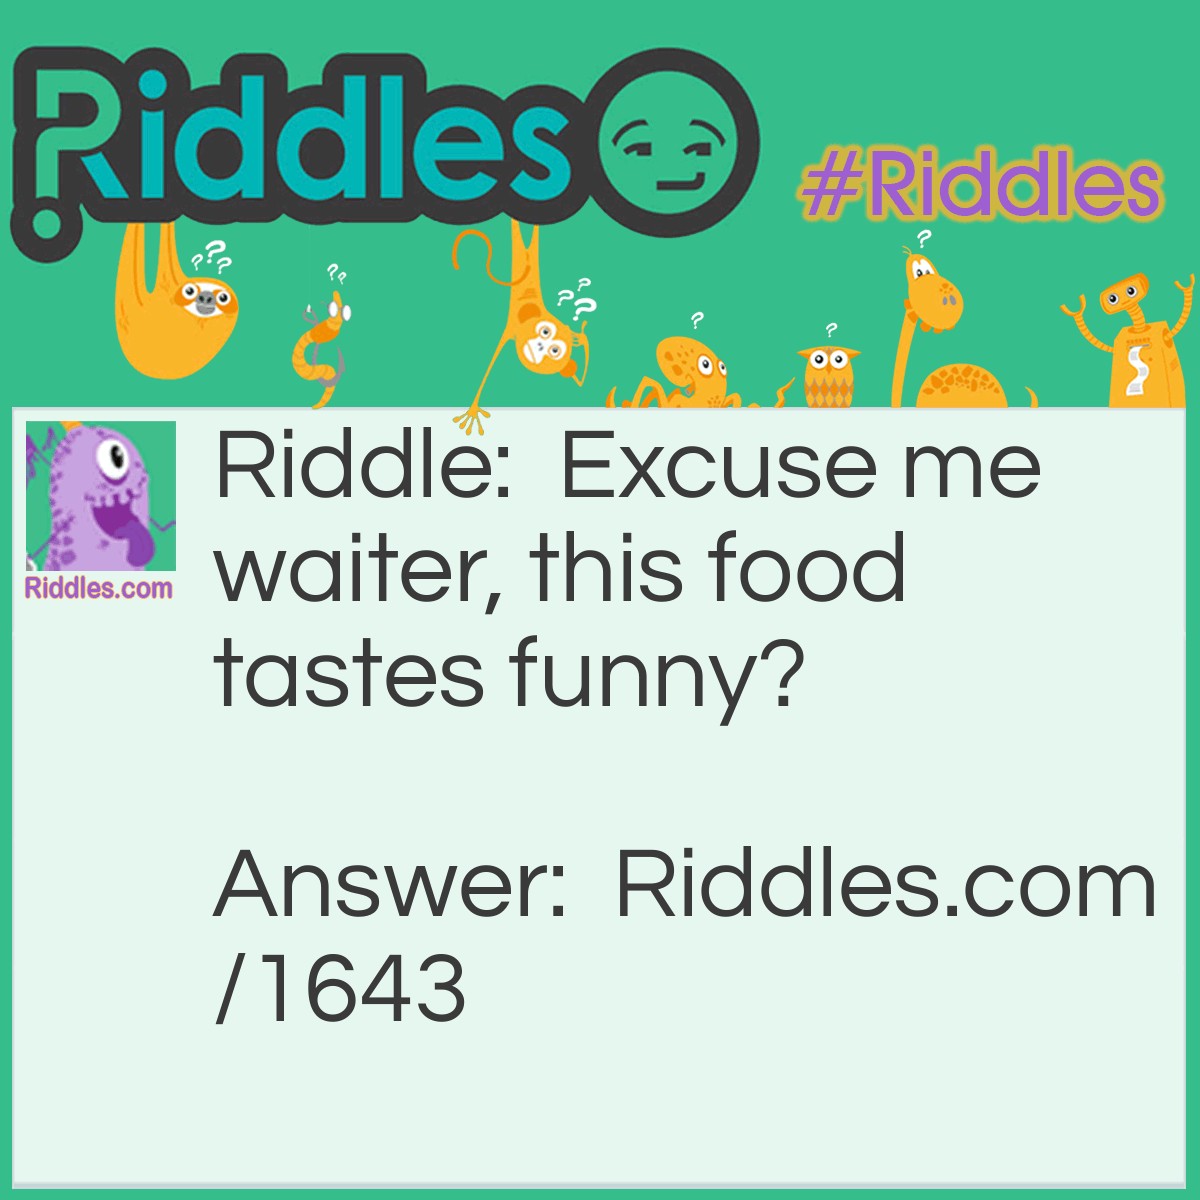 Riddle: Excuse me, waiter, this food tastes <a title="funny riddles" href="https://www.riddles.com/funny-riddles">funny</a>? Answer: Then why aren't you laughing?